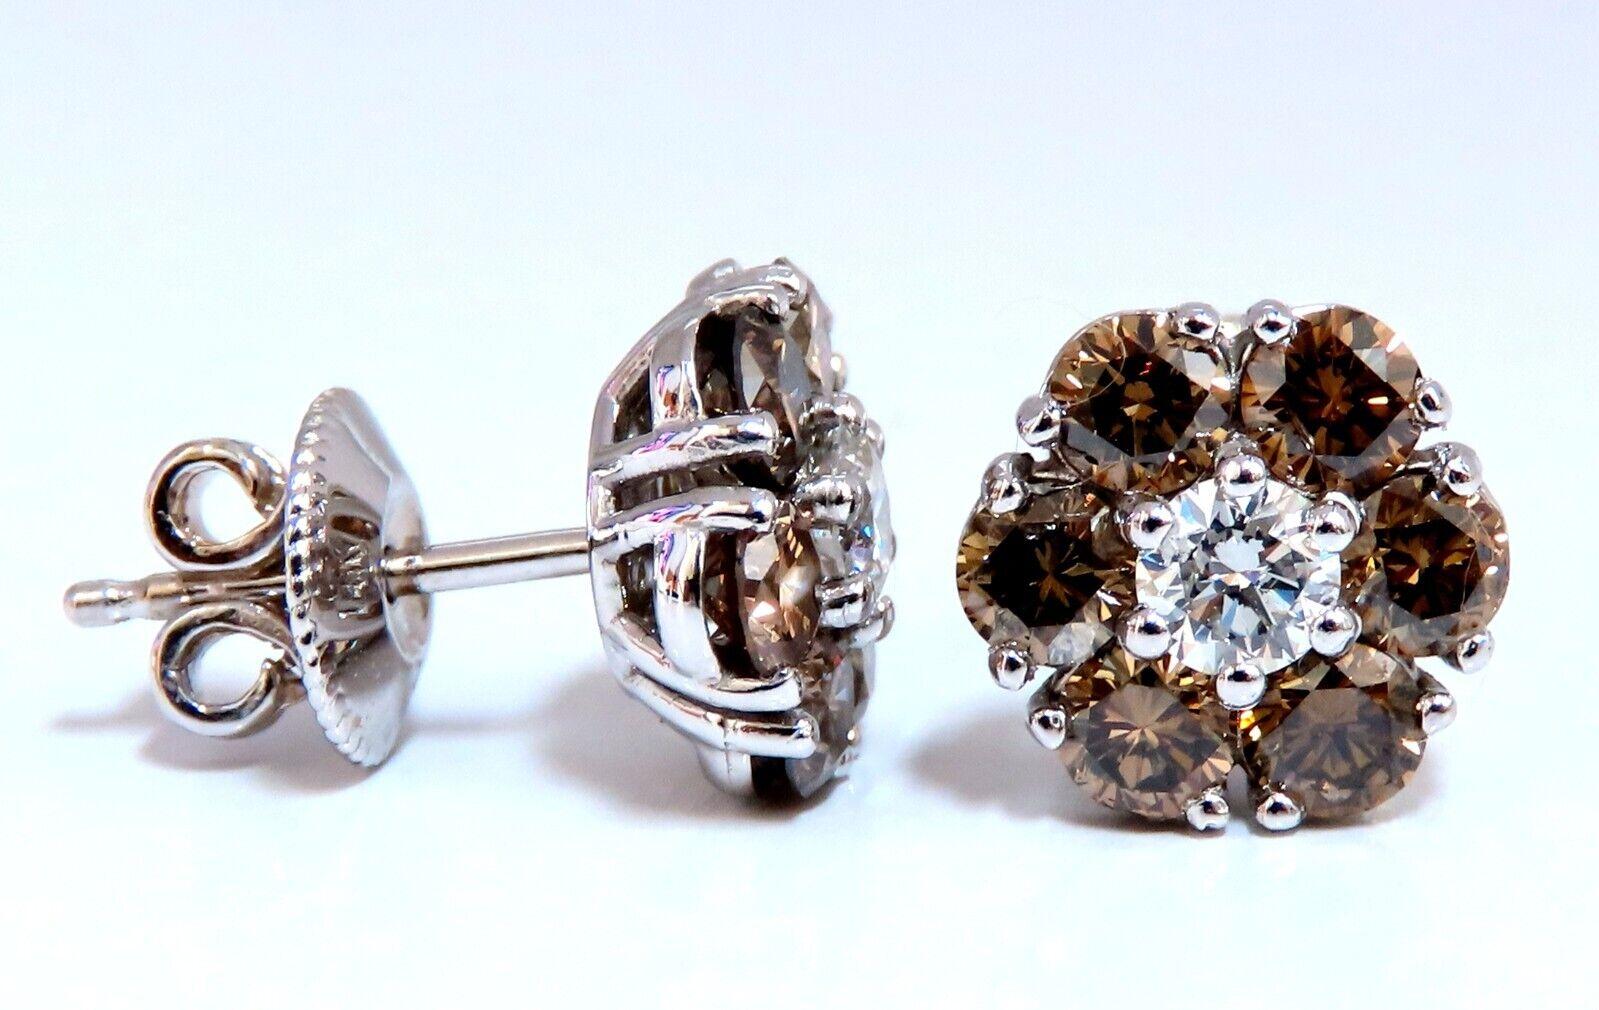 Cluster diamond earrings.

Natural round diamonds

.36ct center (2) diamonds.

G-color Vs-2 clarity

2.44ct side diamond accents.

Natural Fancy Browns -  Si-1 clarity

14 karat white gold 3.5 grams

Earrings measure 10mm wide

$8,000 appraisal